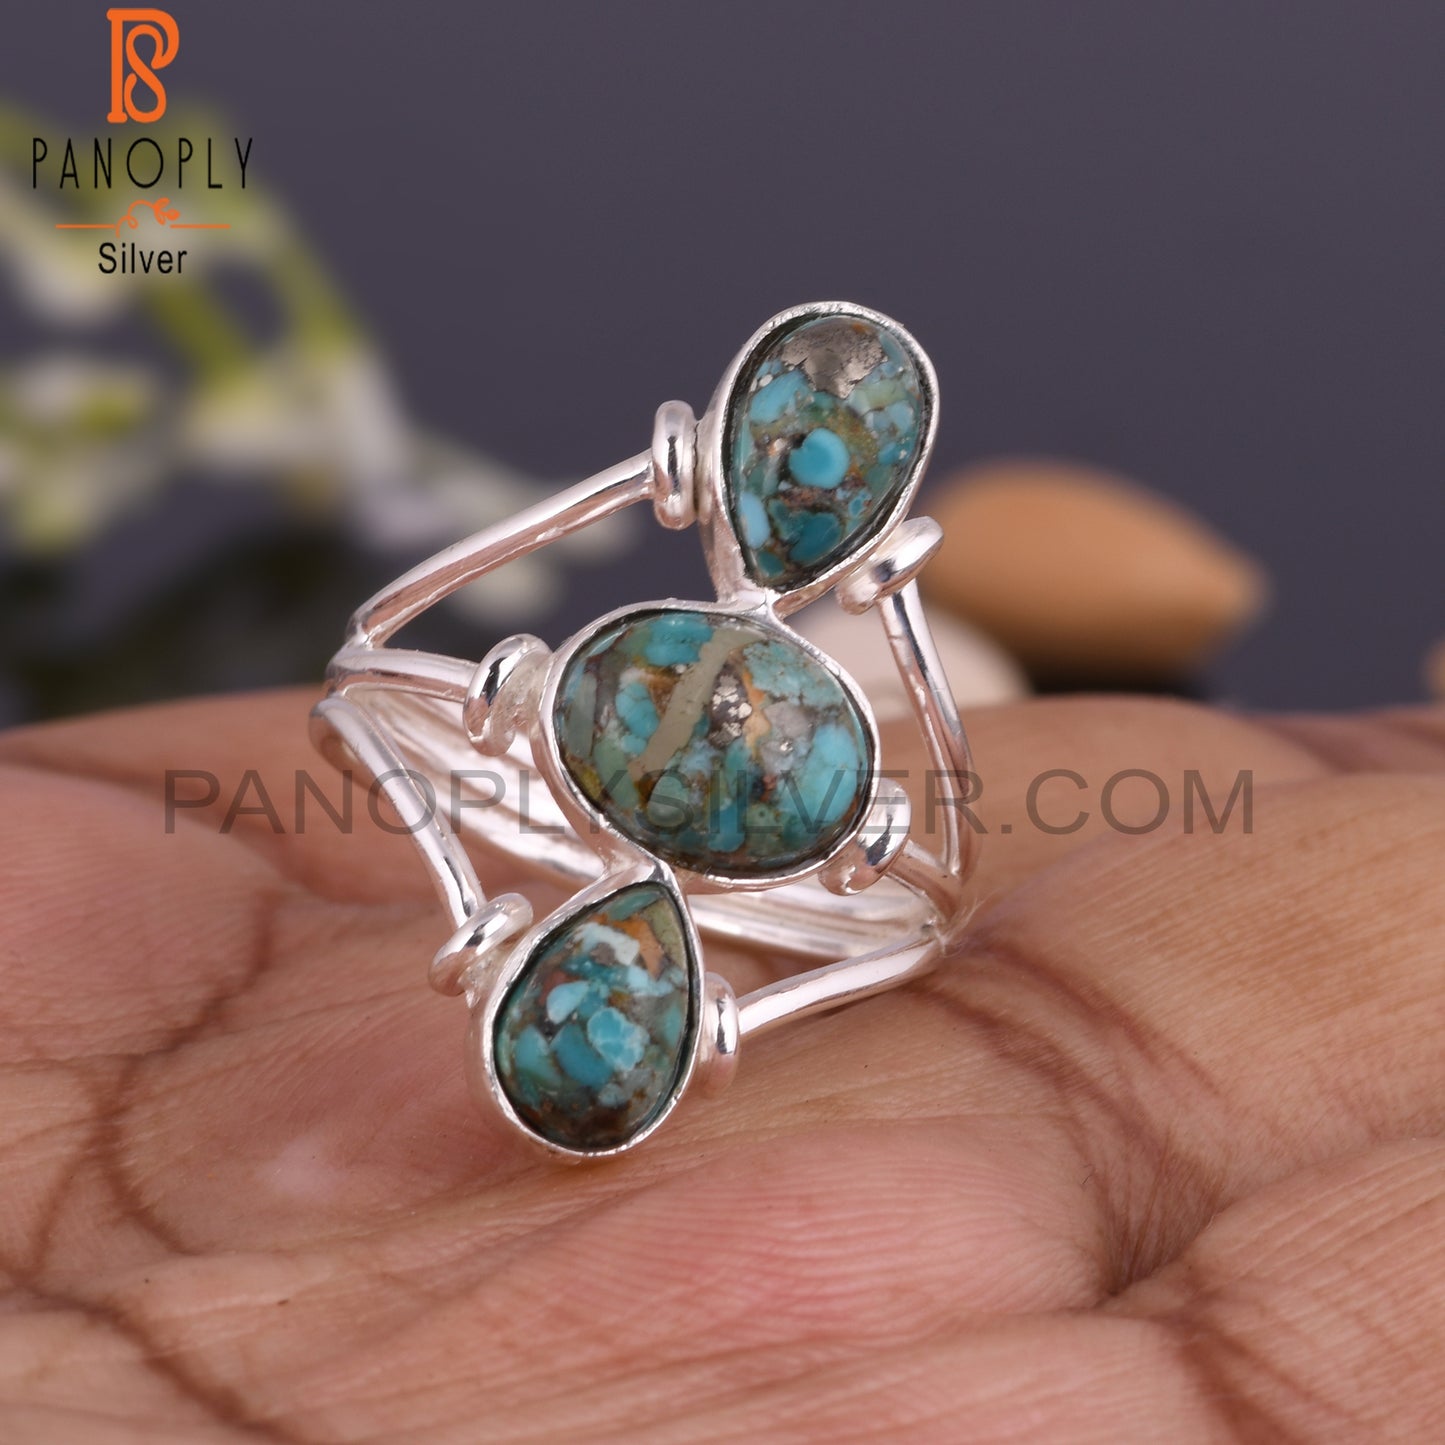 Stylish Boulder Turquoise 925 Sterling Silver Dainty Ring